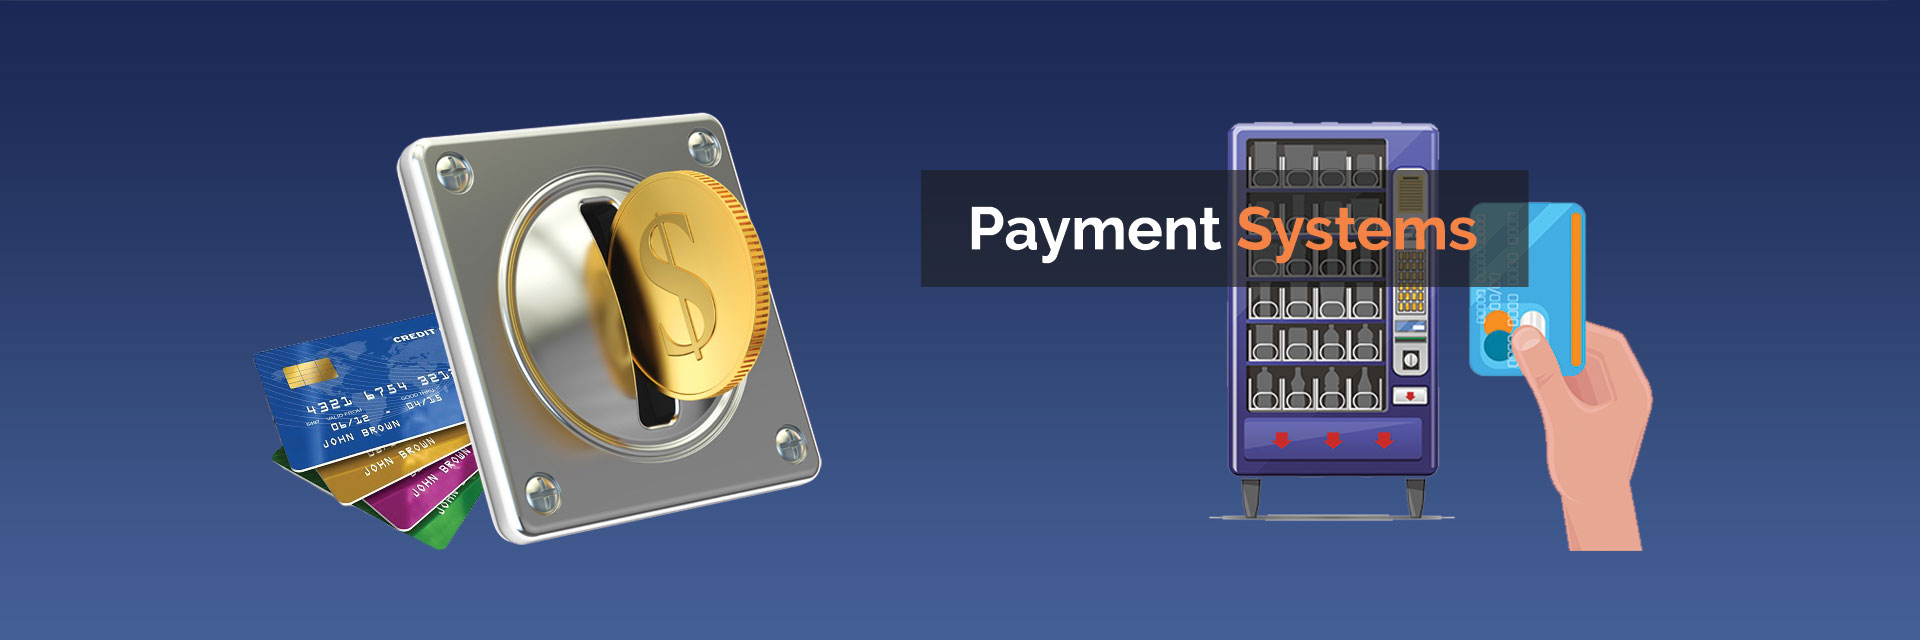 Payment Sytems